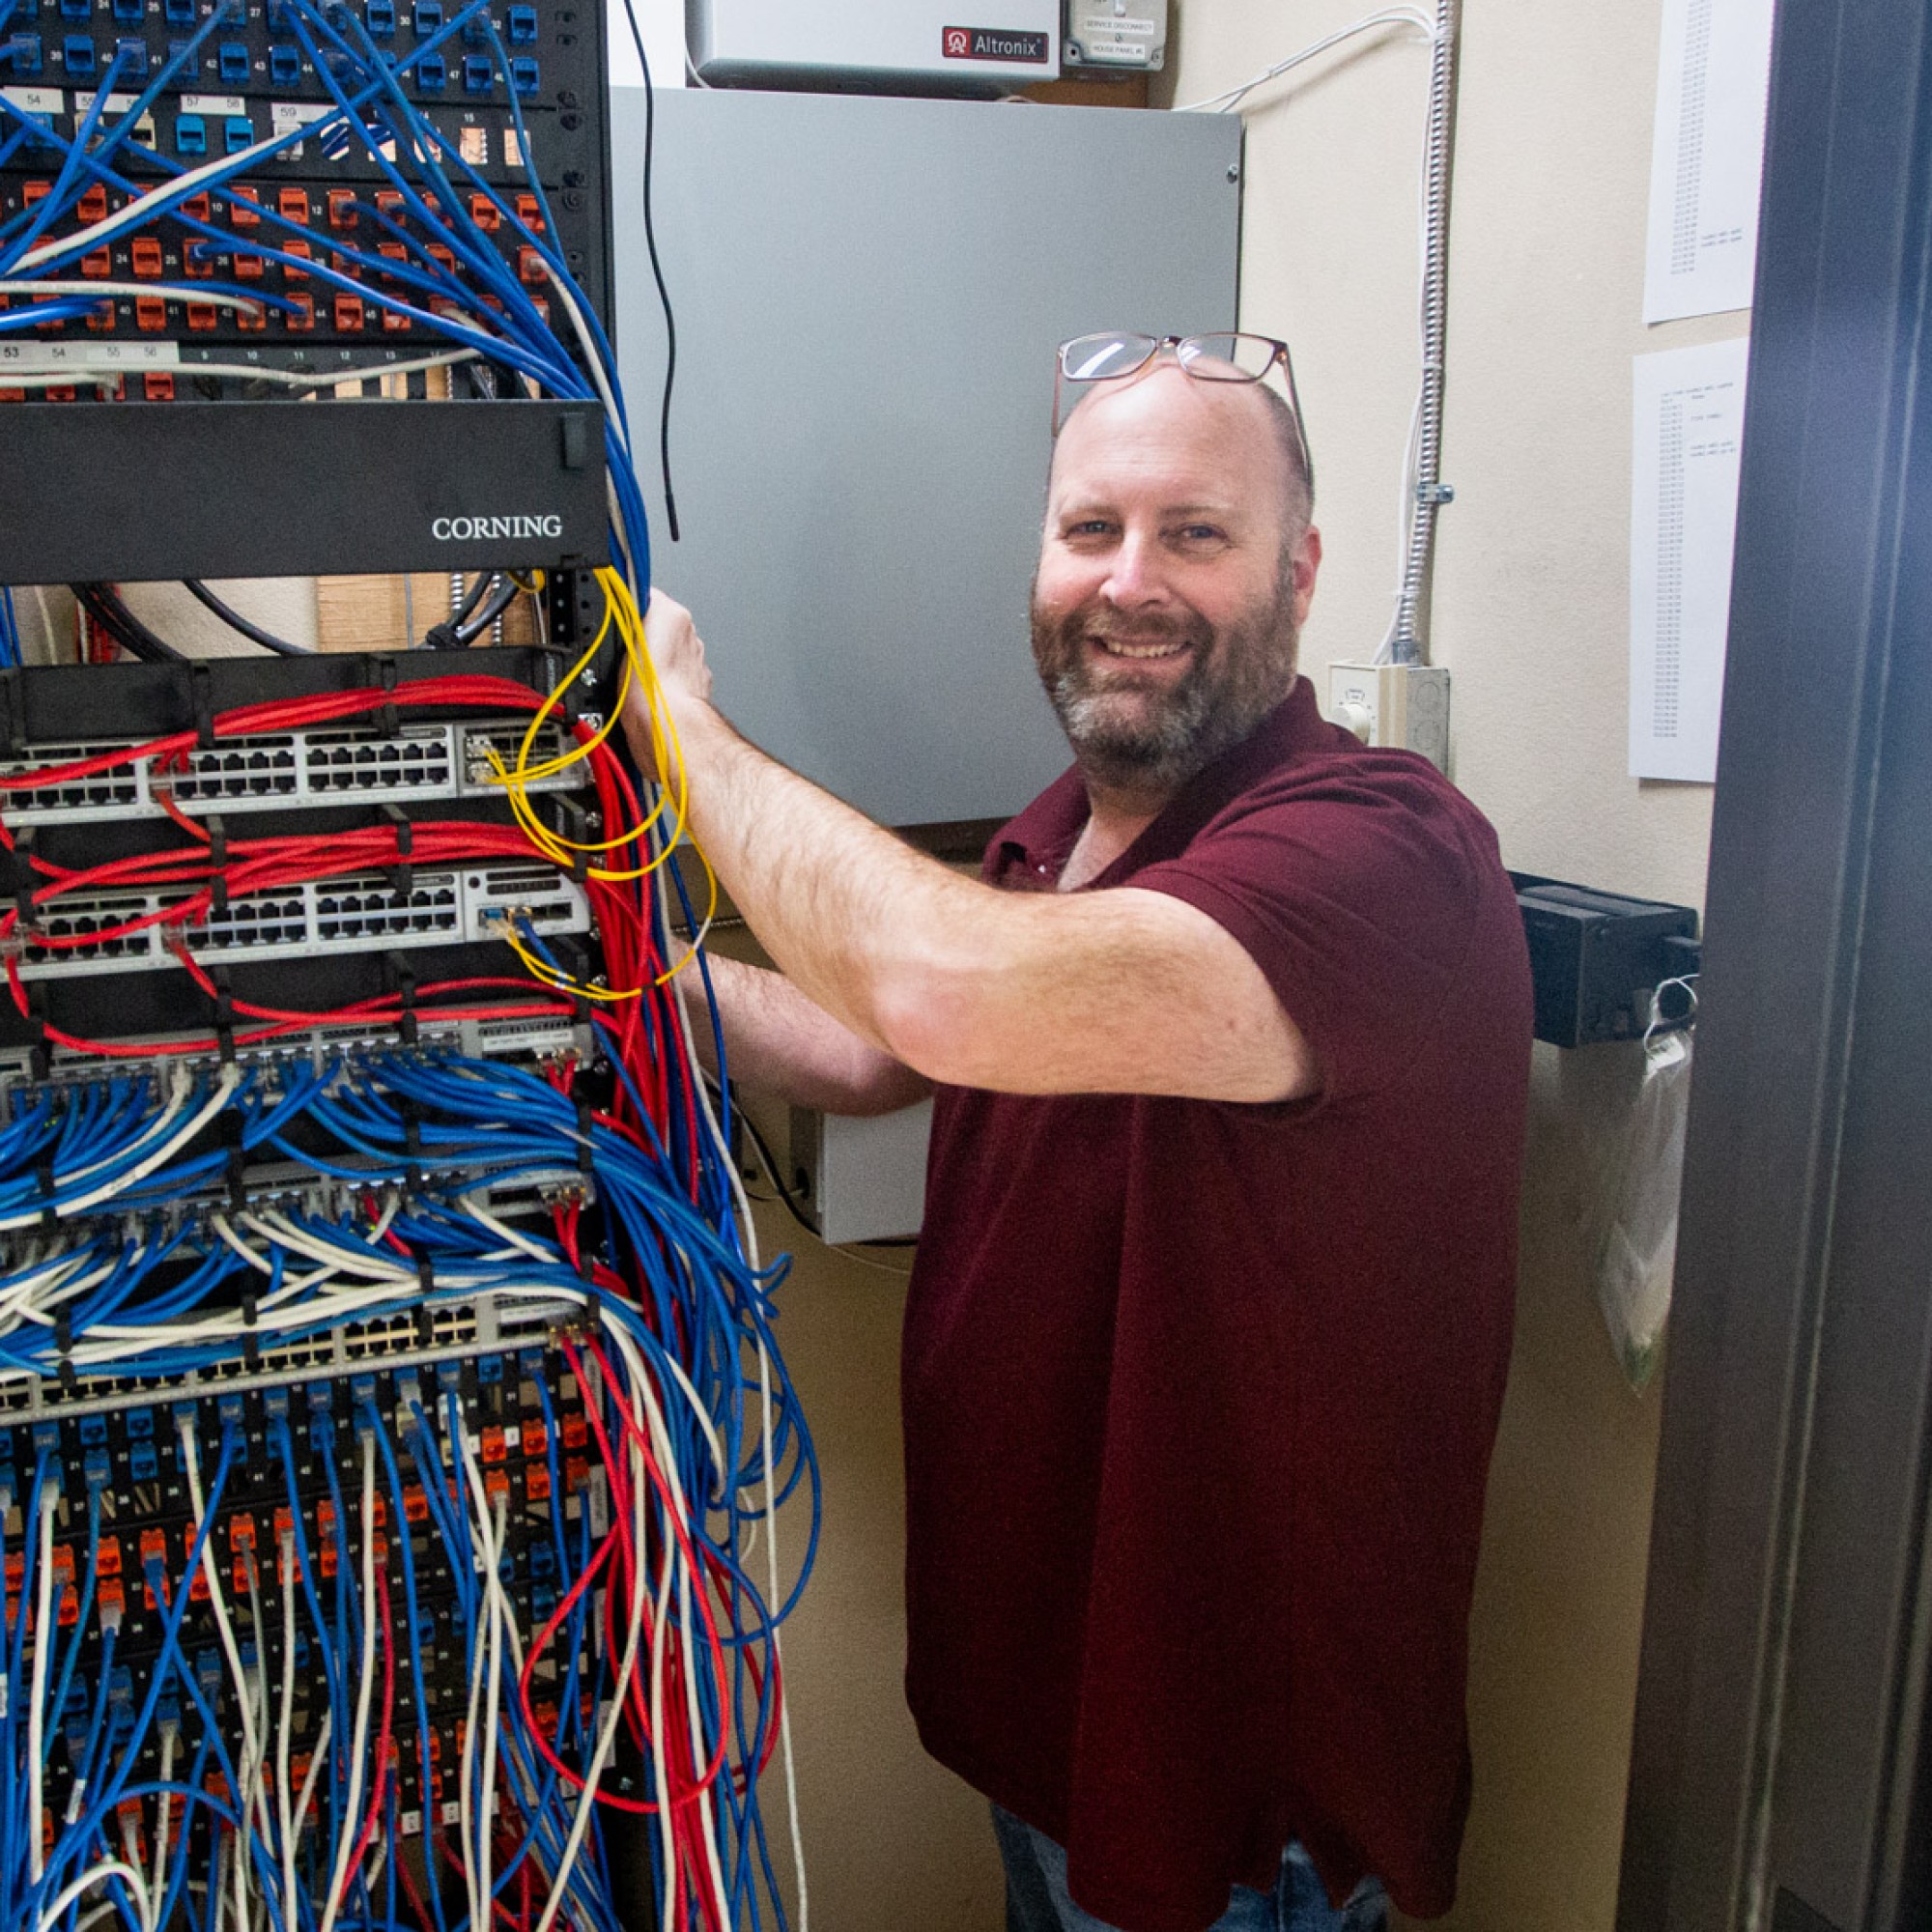 A portrait of William Alworth standing in a telcom closet surrounded by wires and ethernet cables.